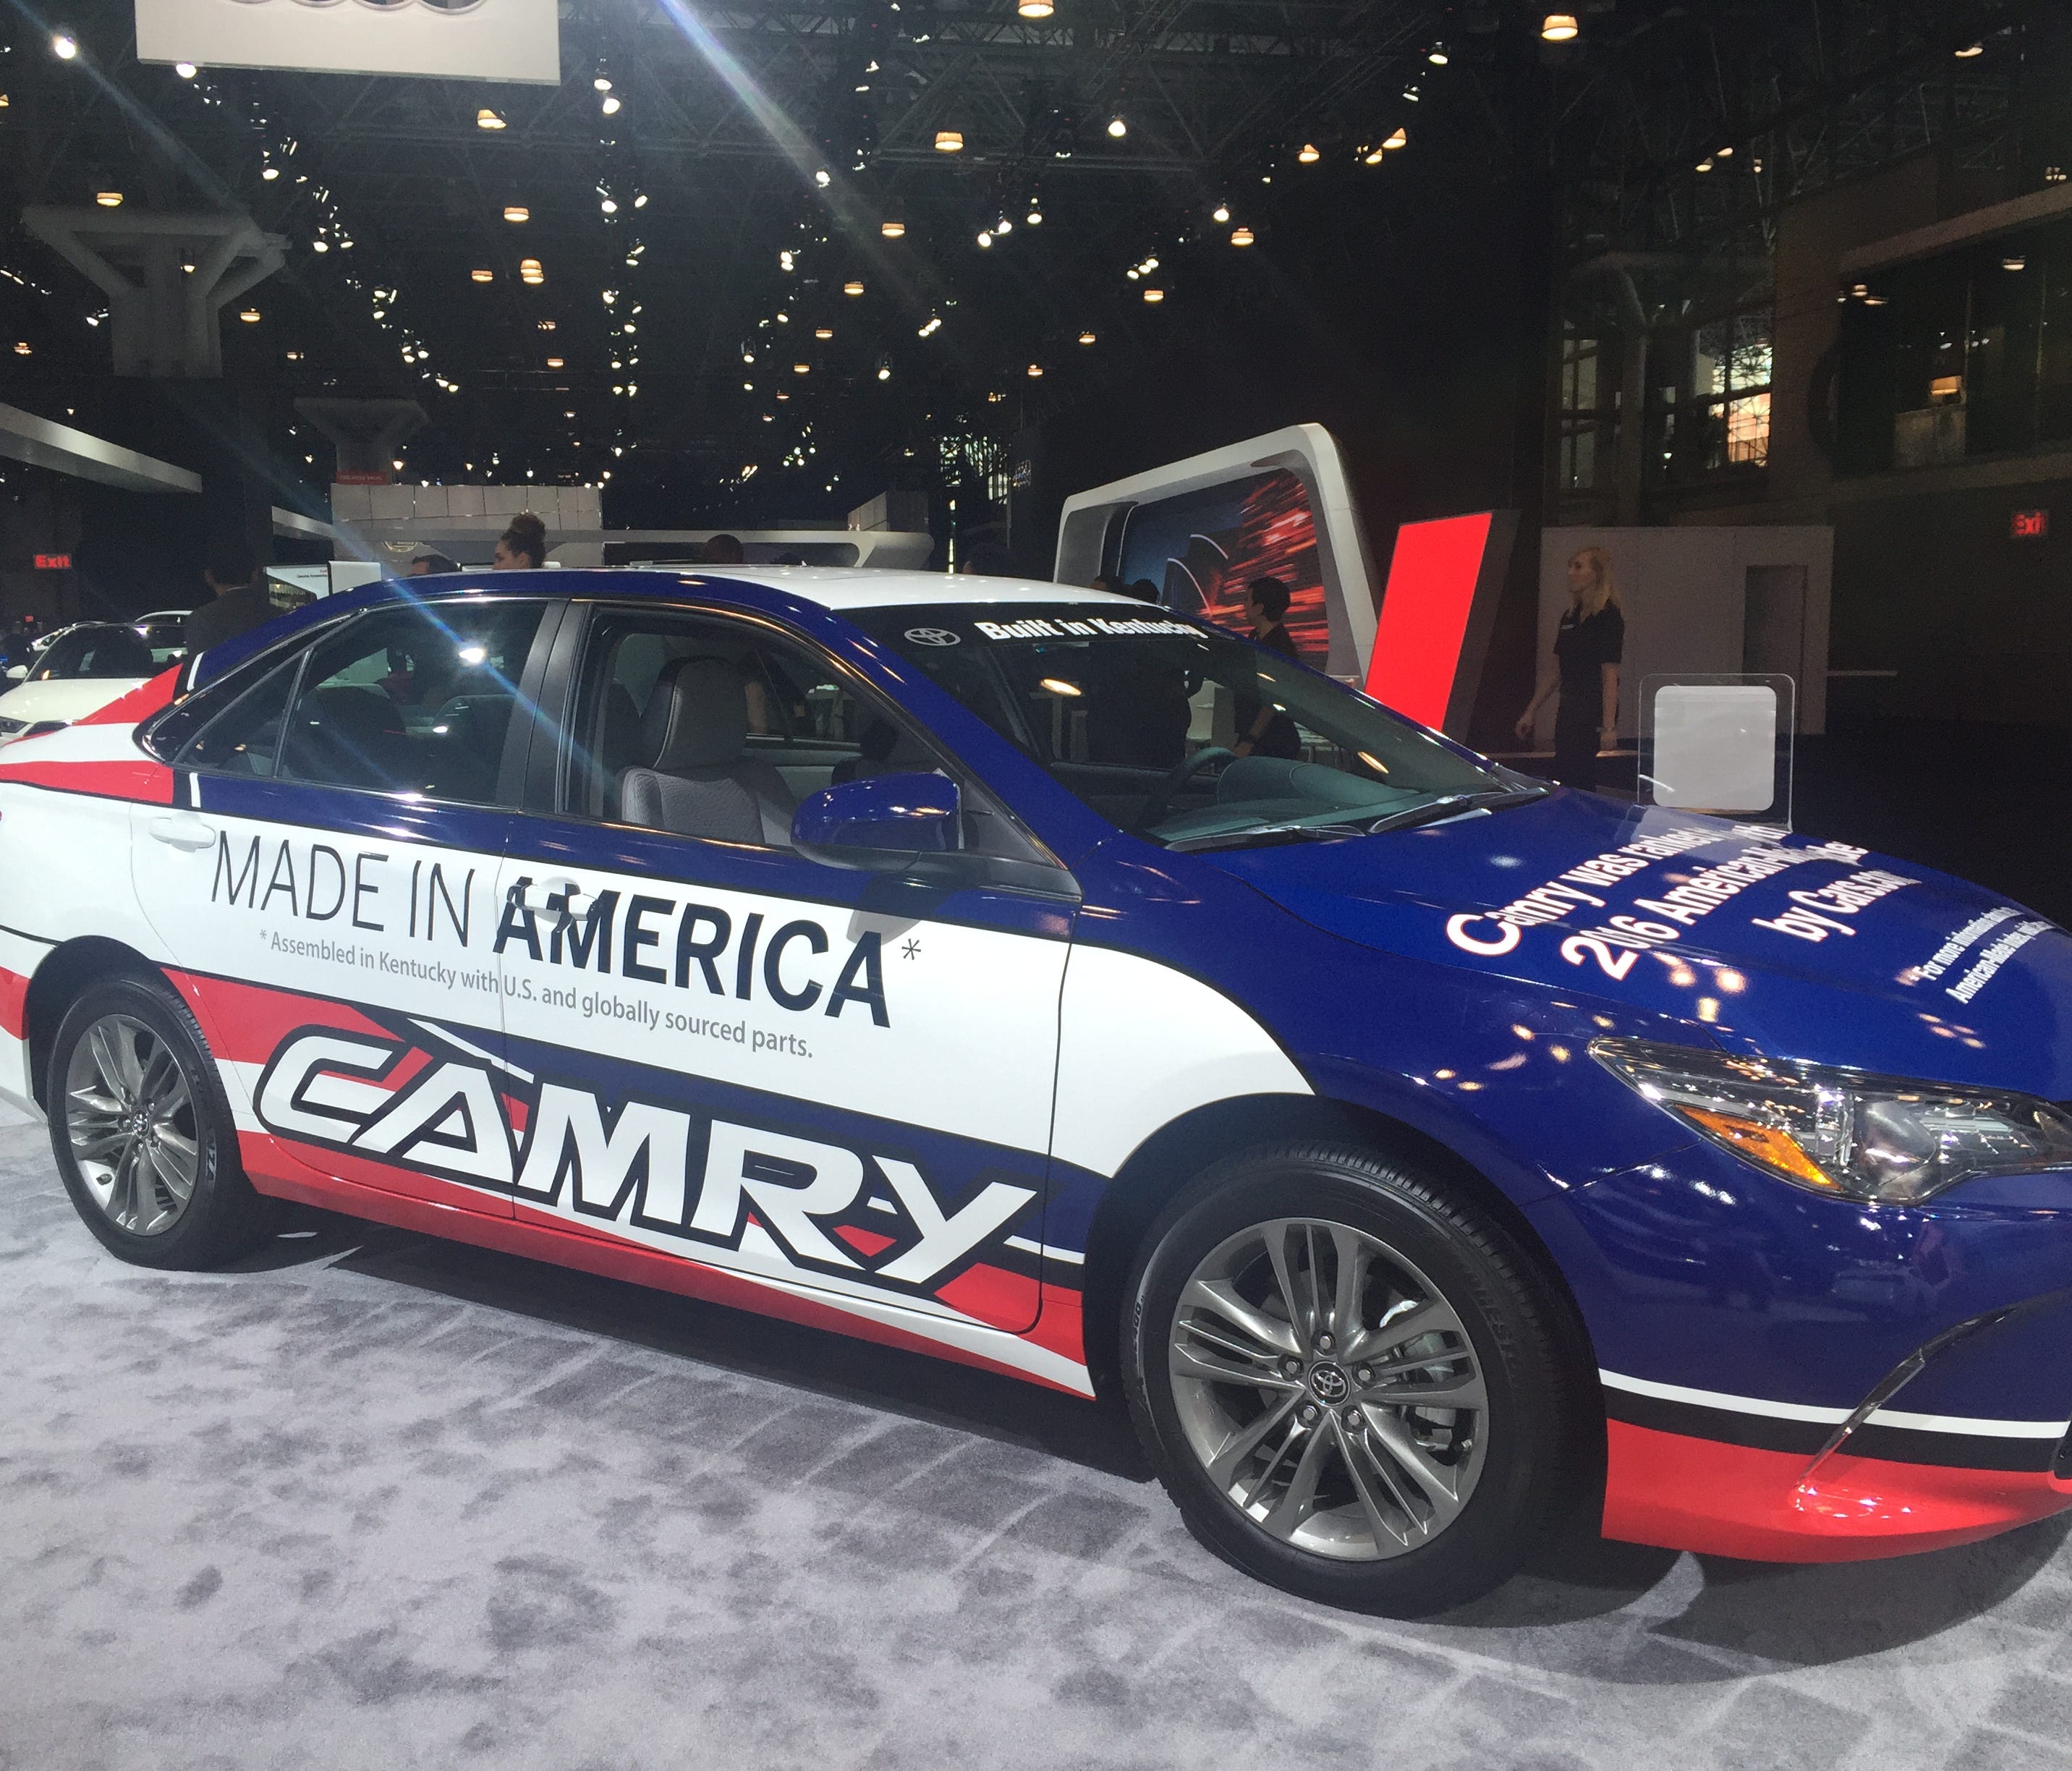 The Toyota Camry, assembled in Georgetown, Ky., is considered by Cars.com as the most American vehicle. This Camry was on display at the North American International Auto Show on April 12, 2013.